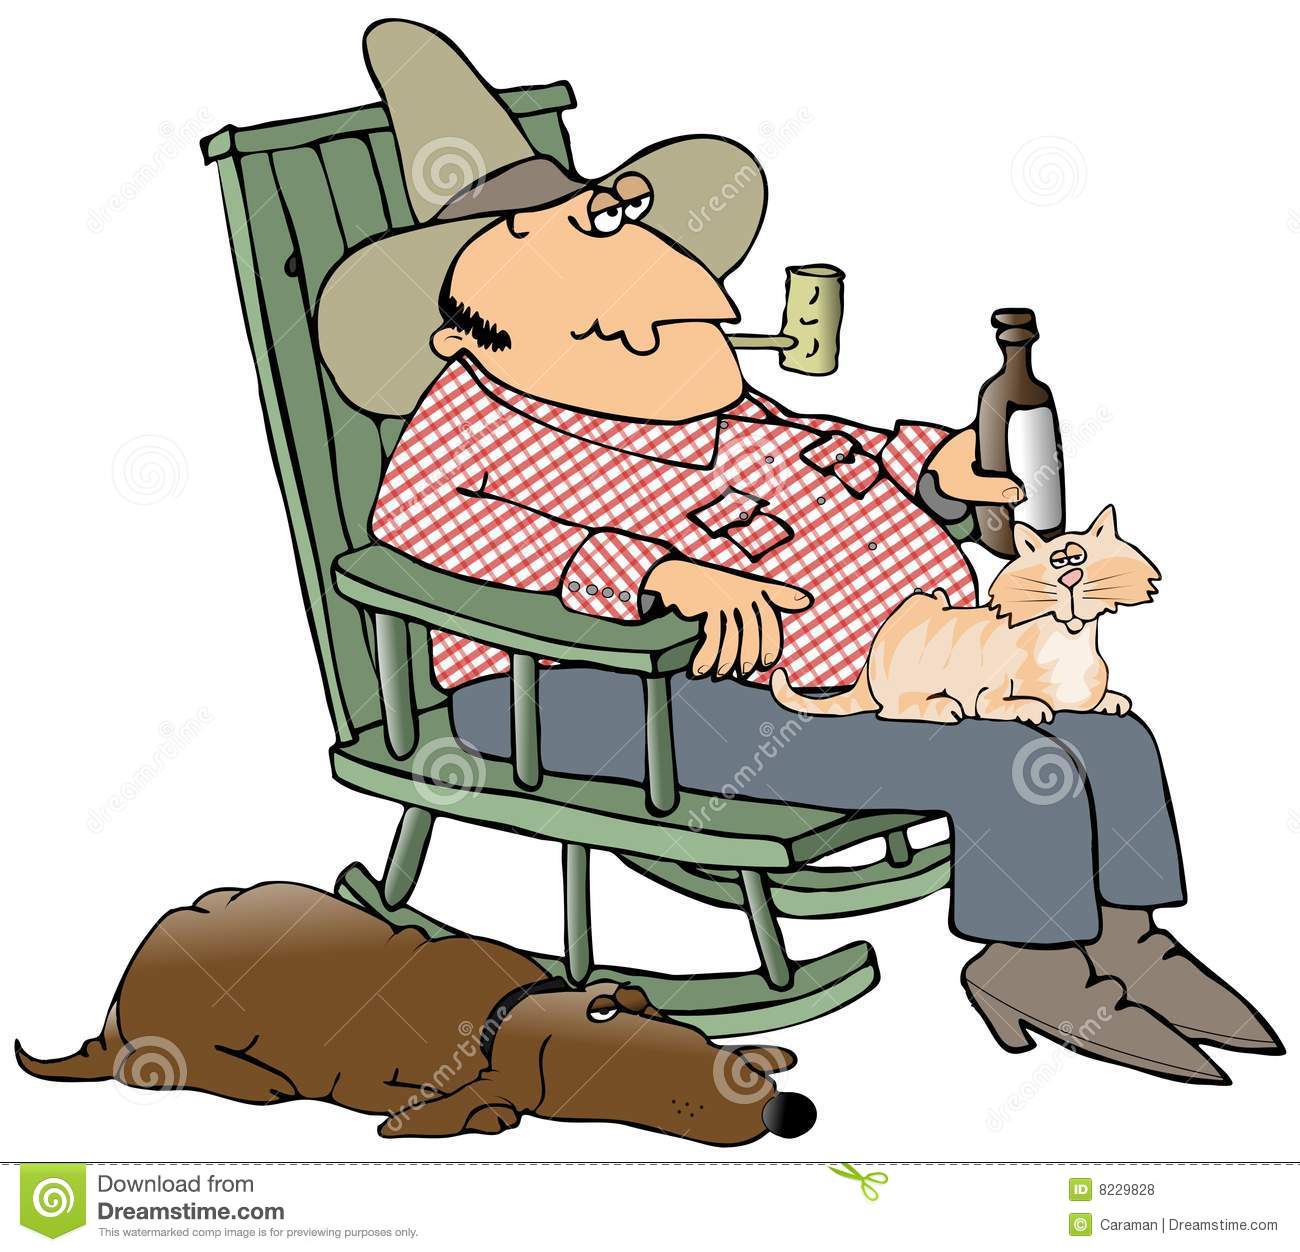 This Illustration Depicts A Hillbilly In A Rocking Chair With A Cat On